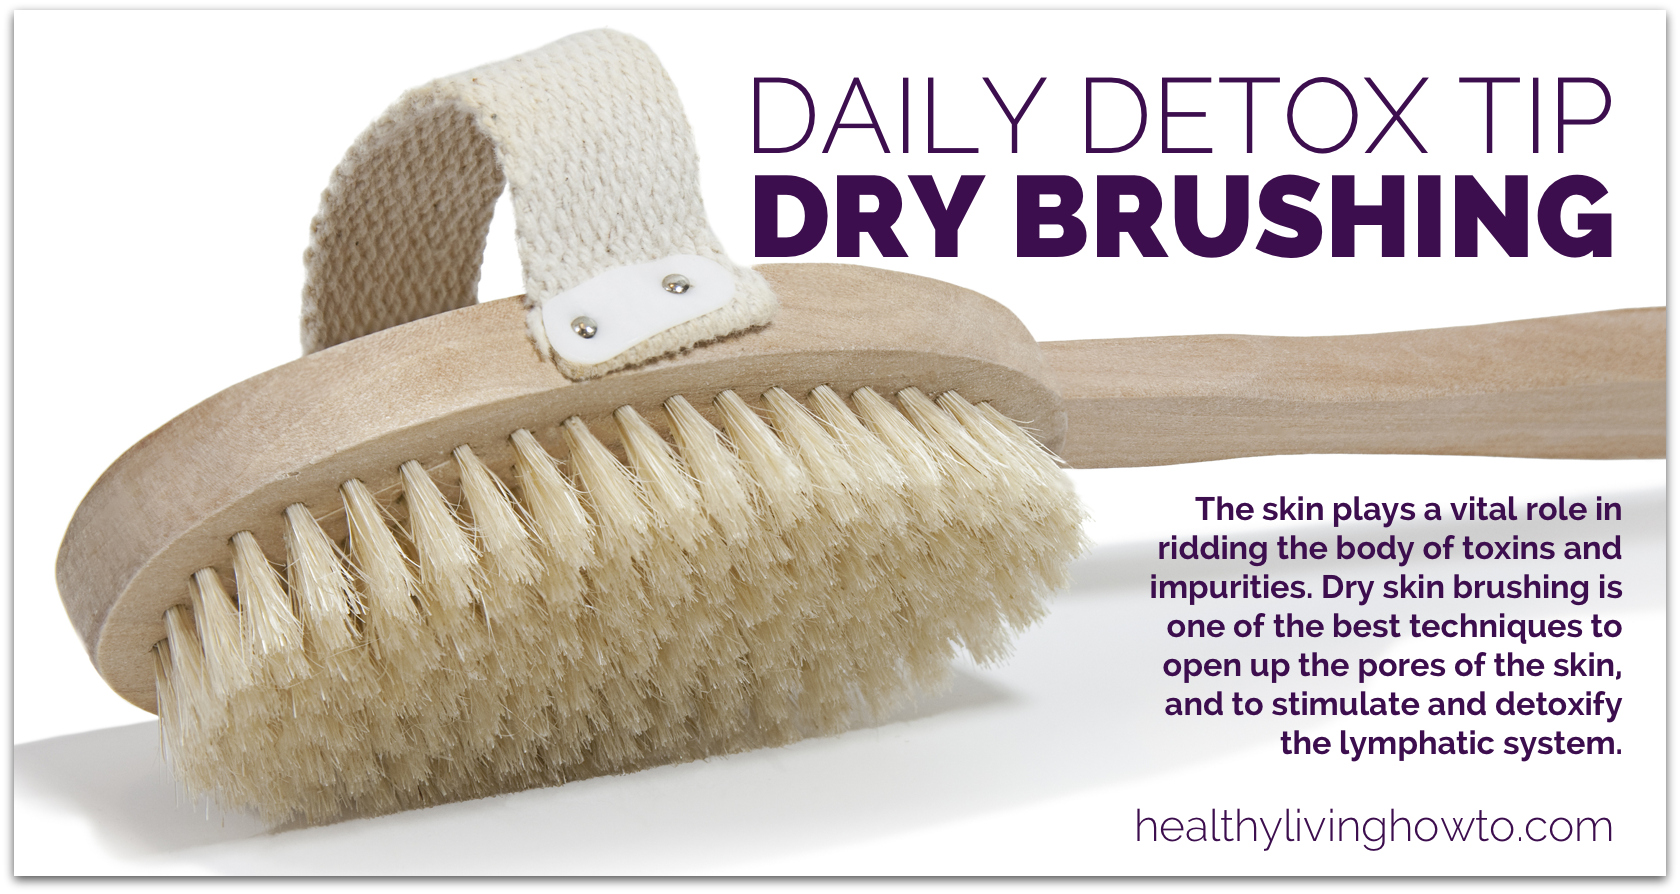 Daily Detox Tip: Dry Skin Brushing | healthylivinghowto.com